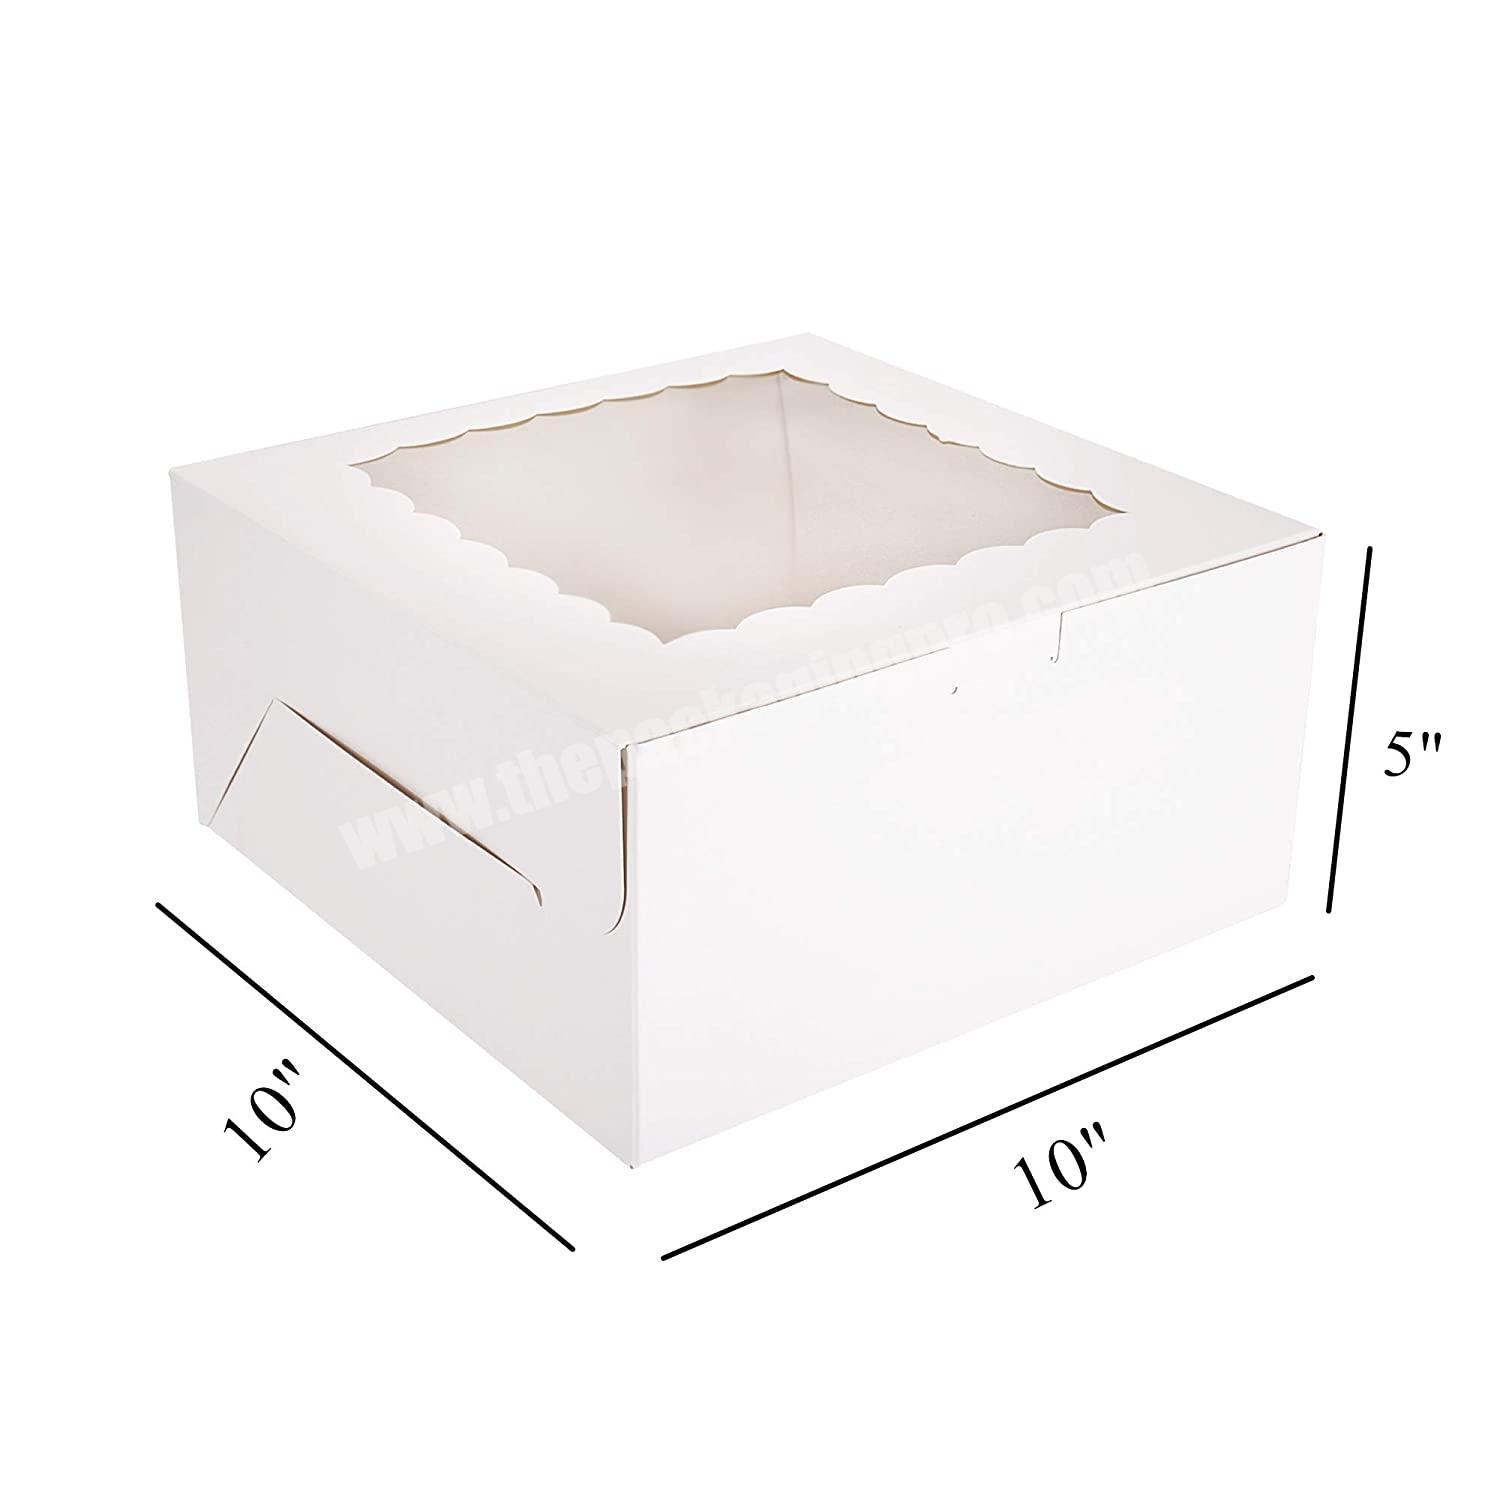 Custom Cake Containers with Window 10'' x 10'' x 5'' transparent Cake Packaging Boxes with Cake Boards in bulk